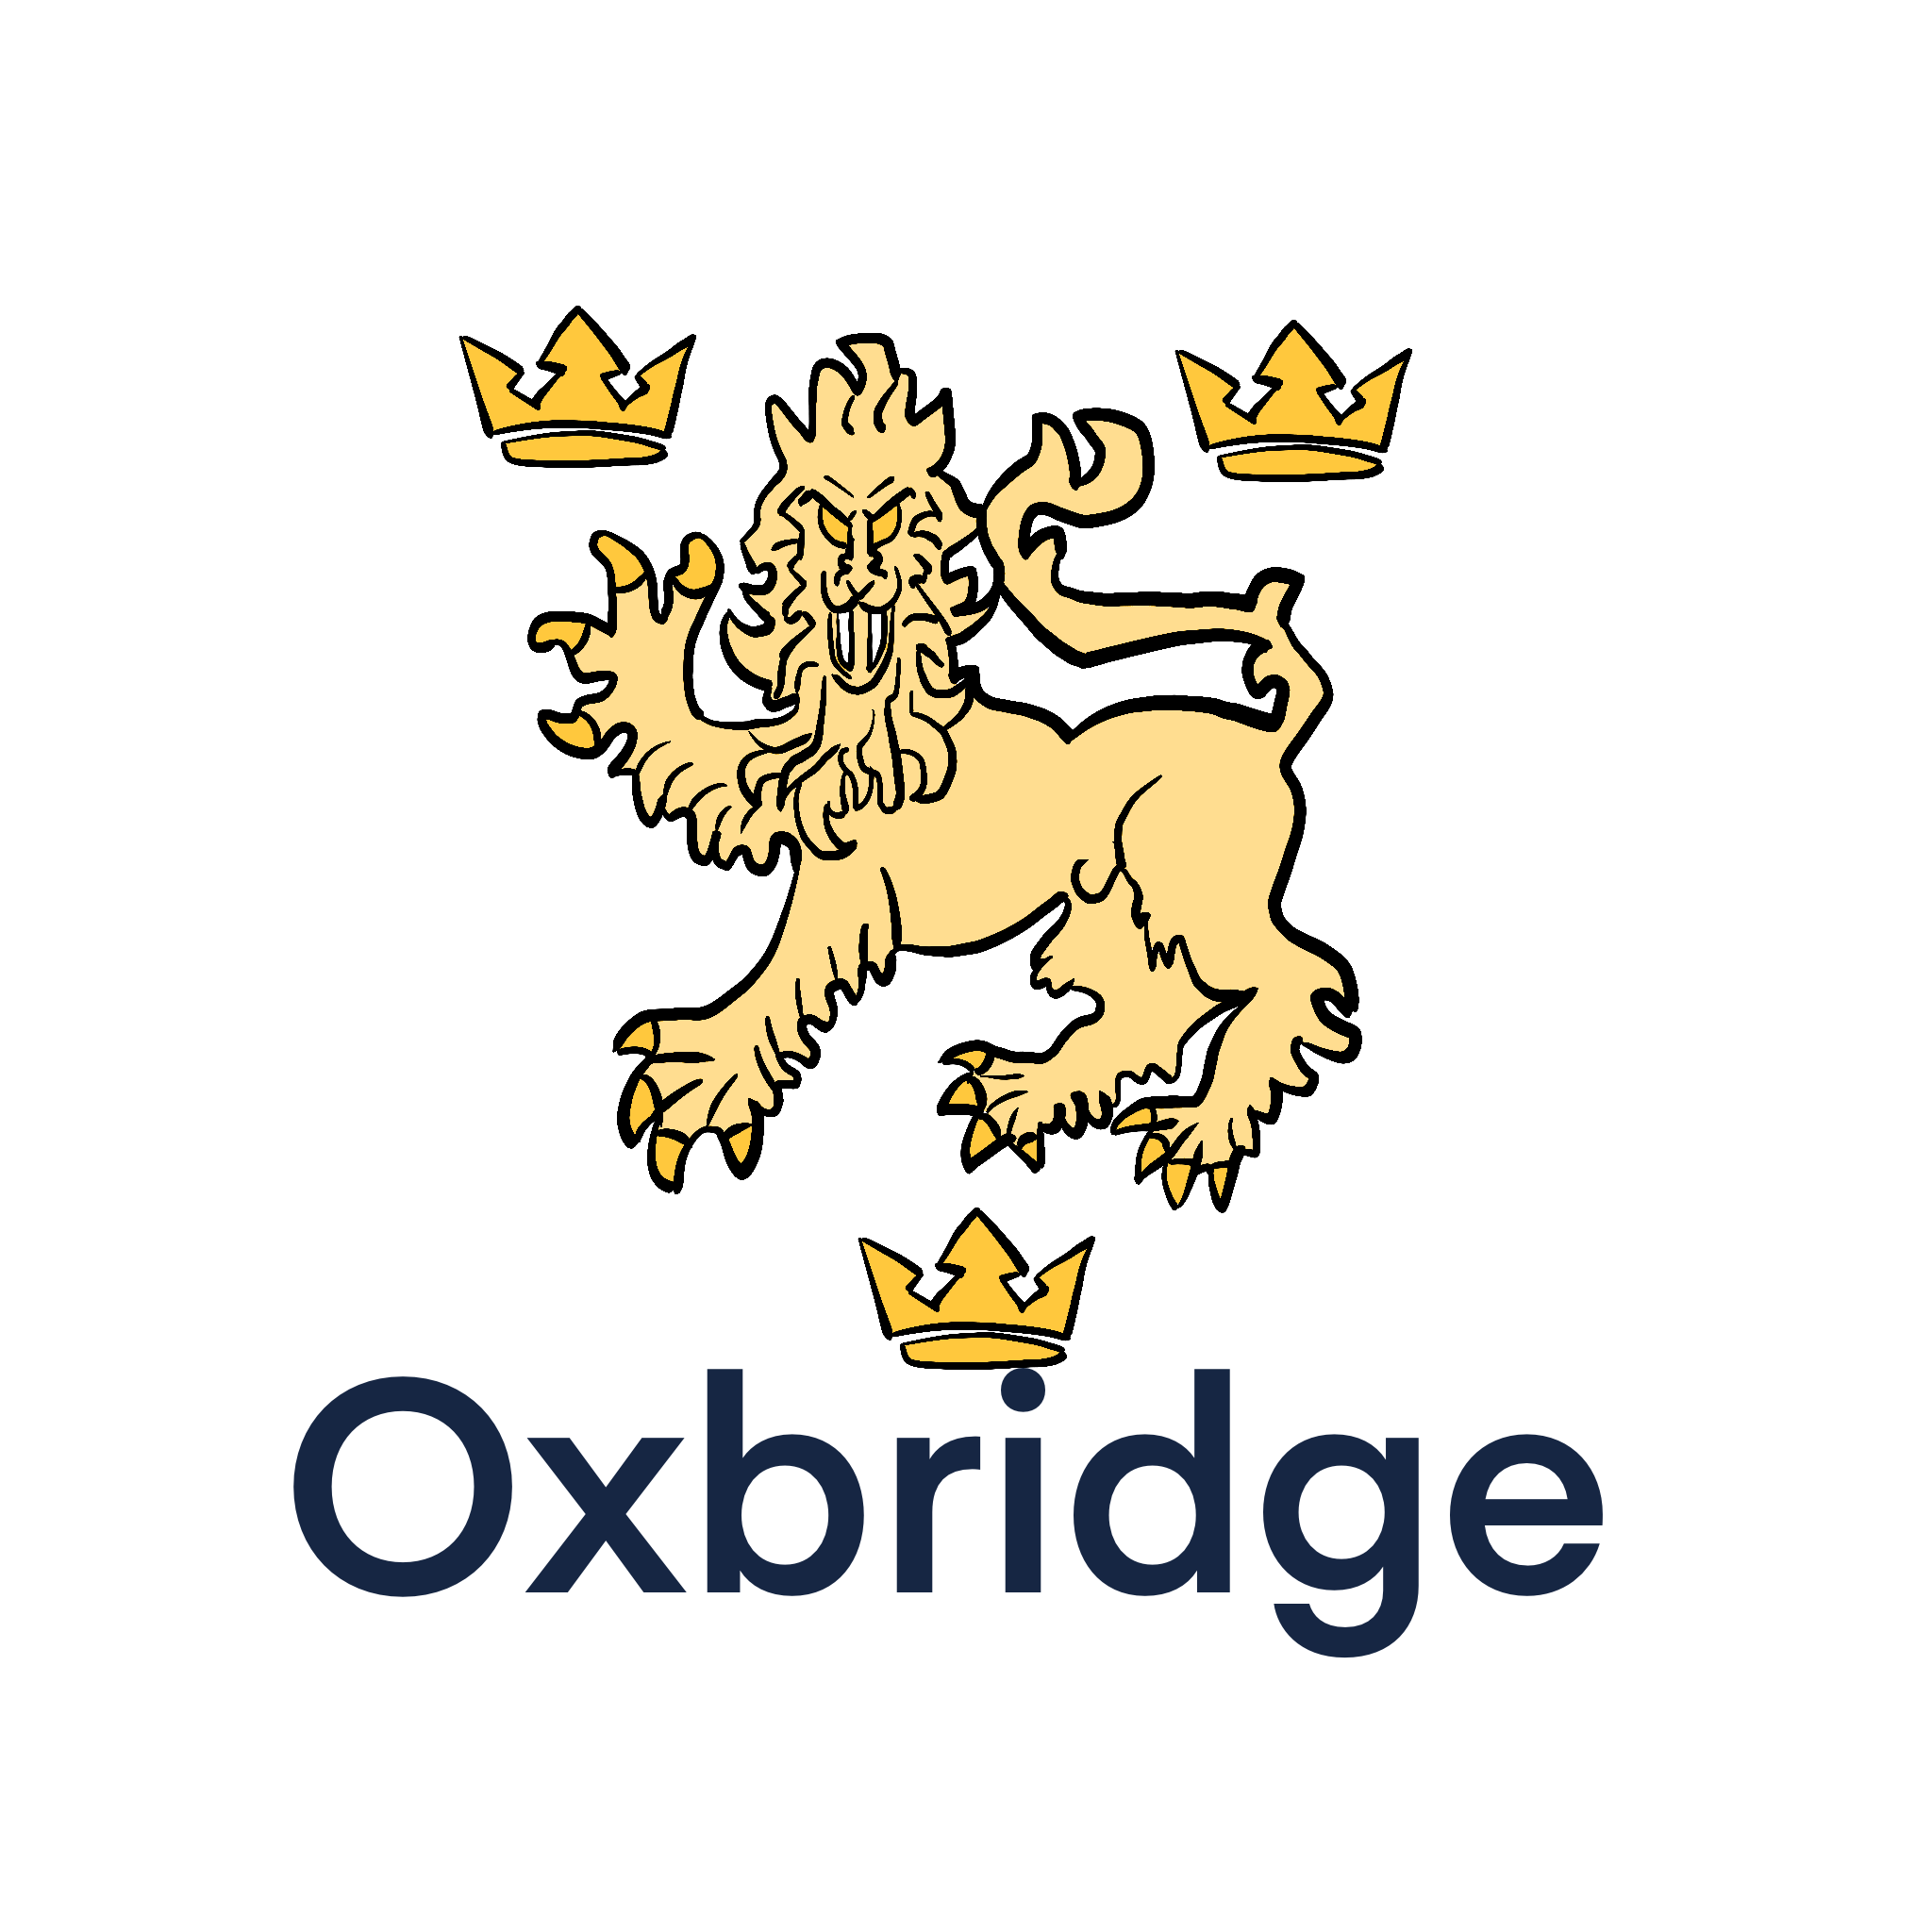 Maggie holds a degree from Oxbridge